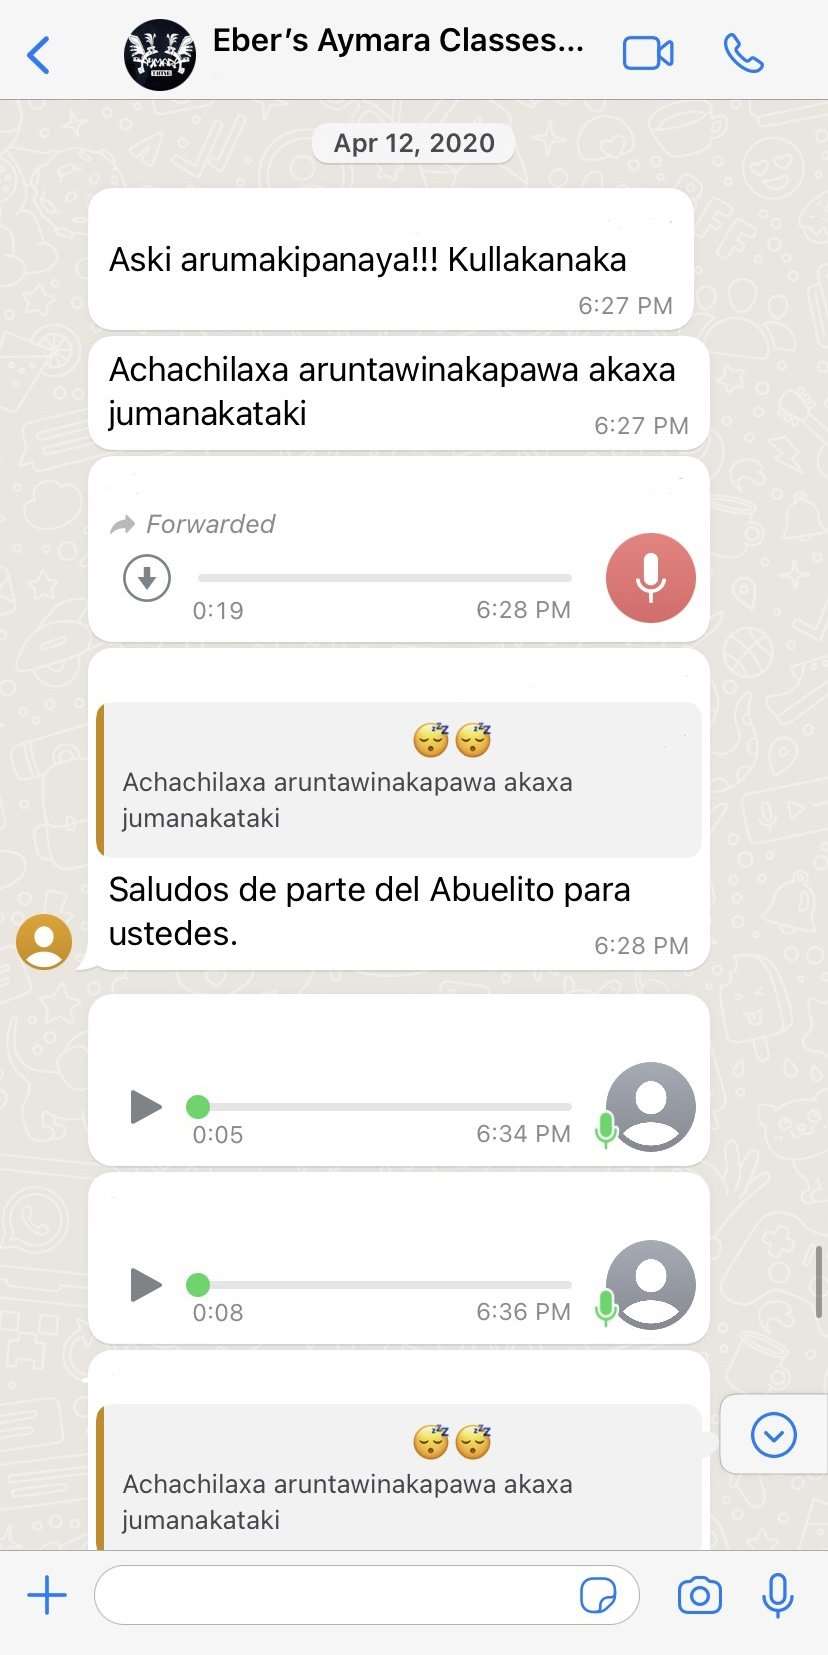   Screenshot of Aymara Class Chat in May 2020, Eber sending us greetings from his grandfather, Courtesy of Yvette Ramírez  